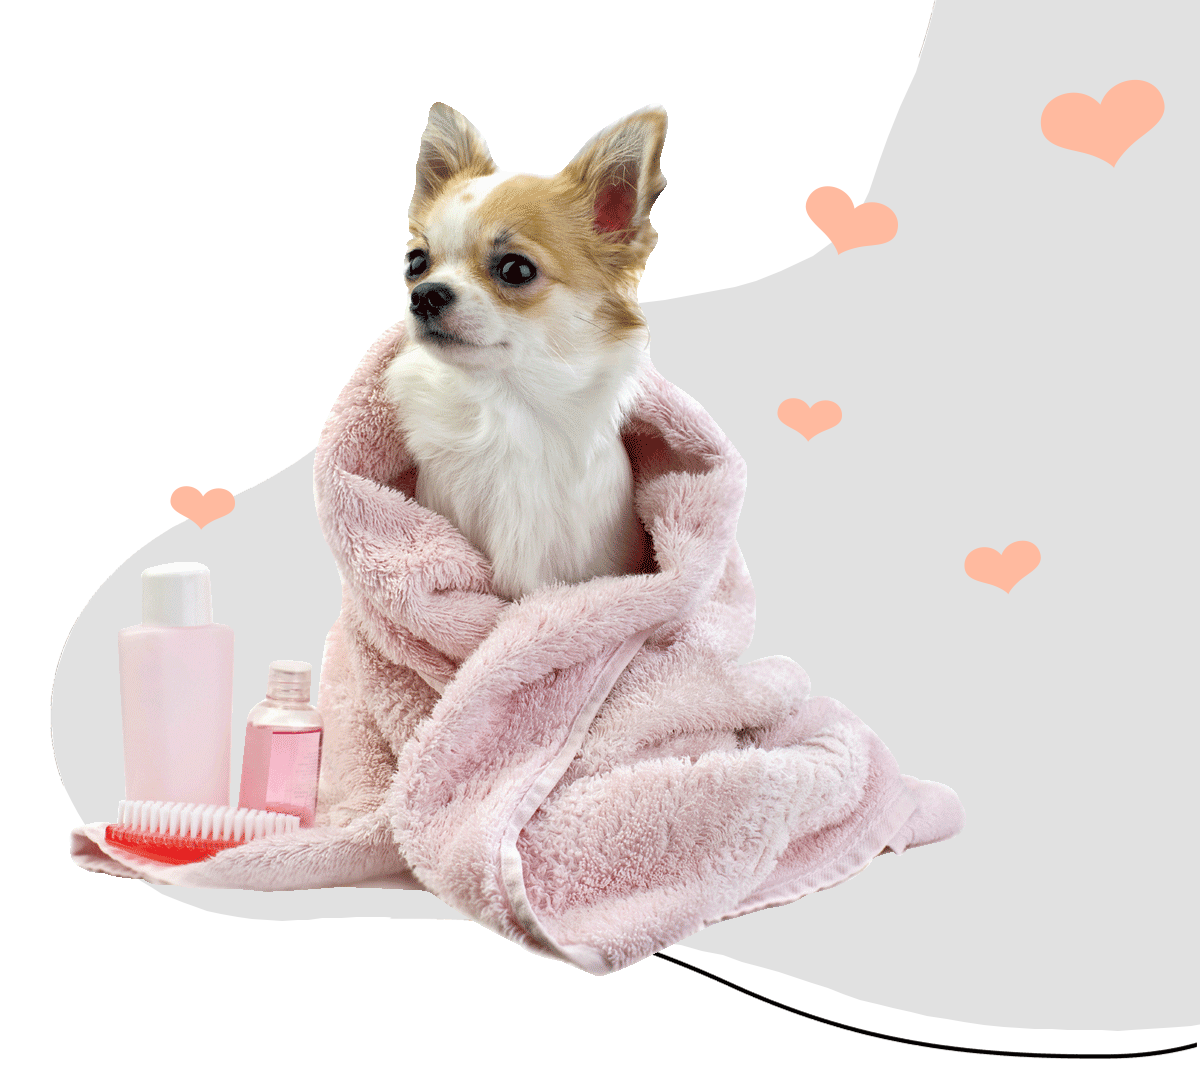 https://pamperedpawssd.com/wp-content/uploads/2020/07/puppy-love-contact-page.png